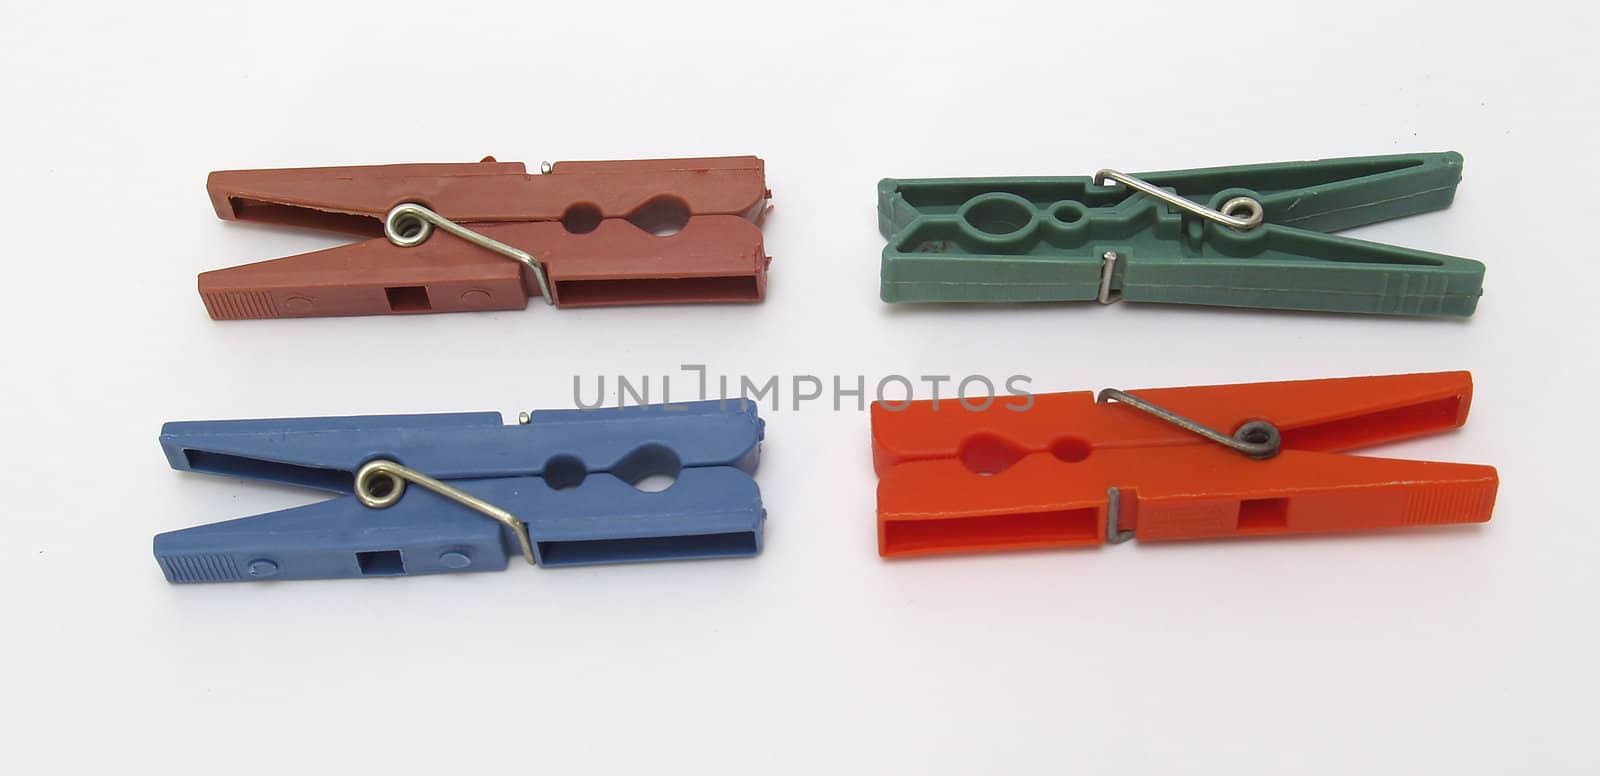 clasps to hold clothes by lauria